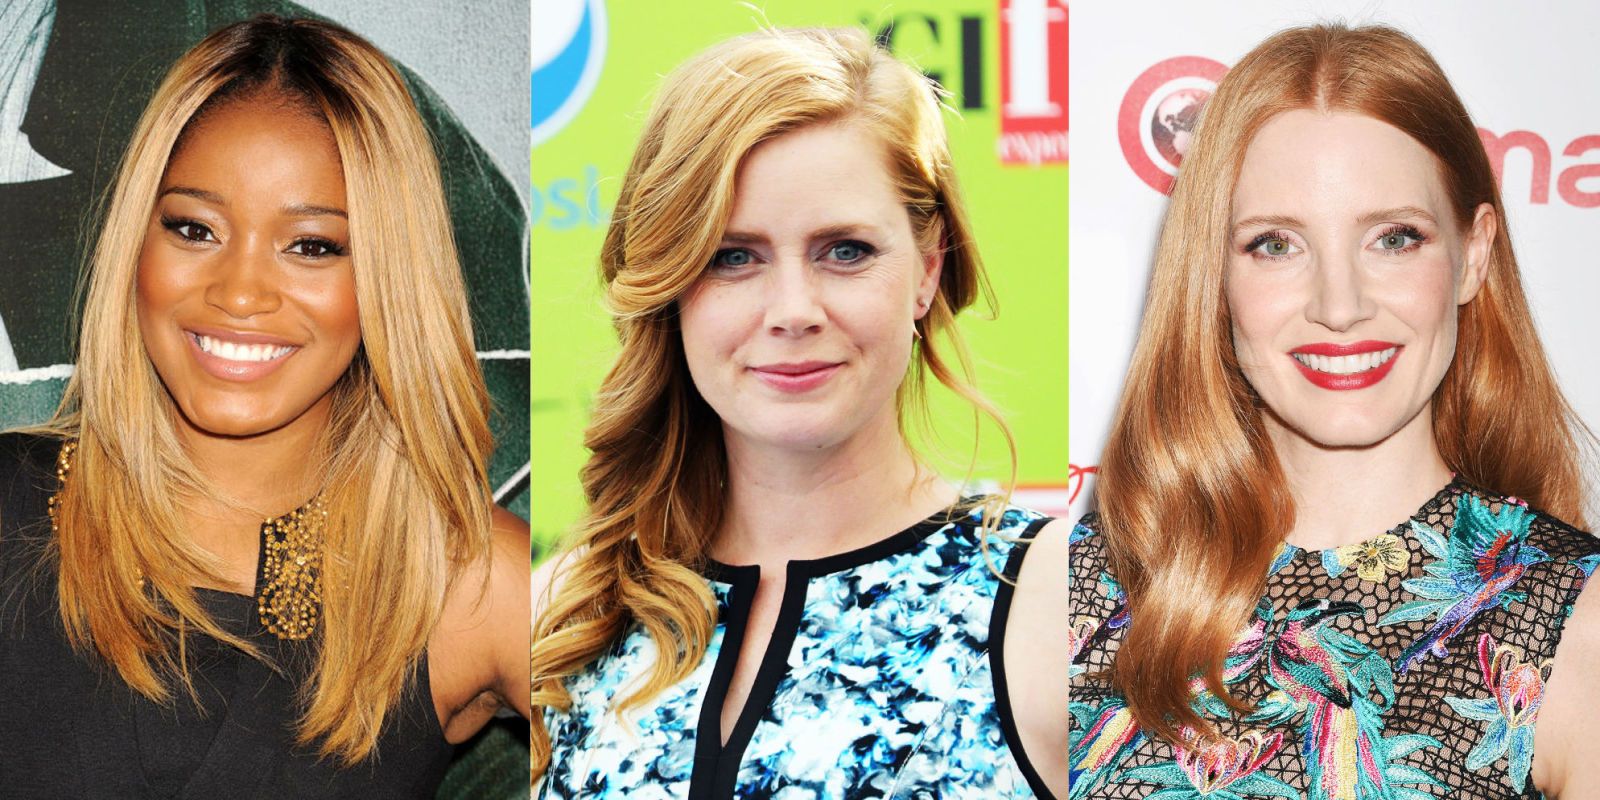 10 Gorgeous Shaggy Strawberry Blonde Hairstyles to Try - wide 8